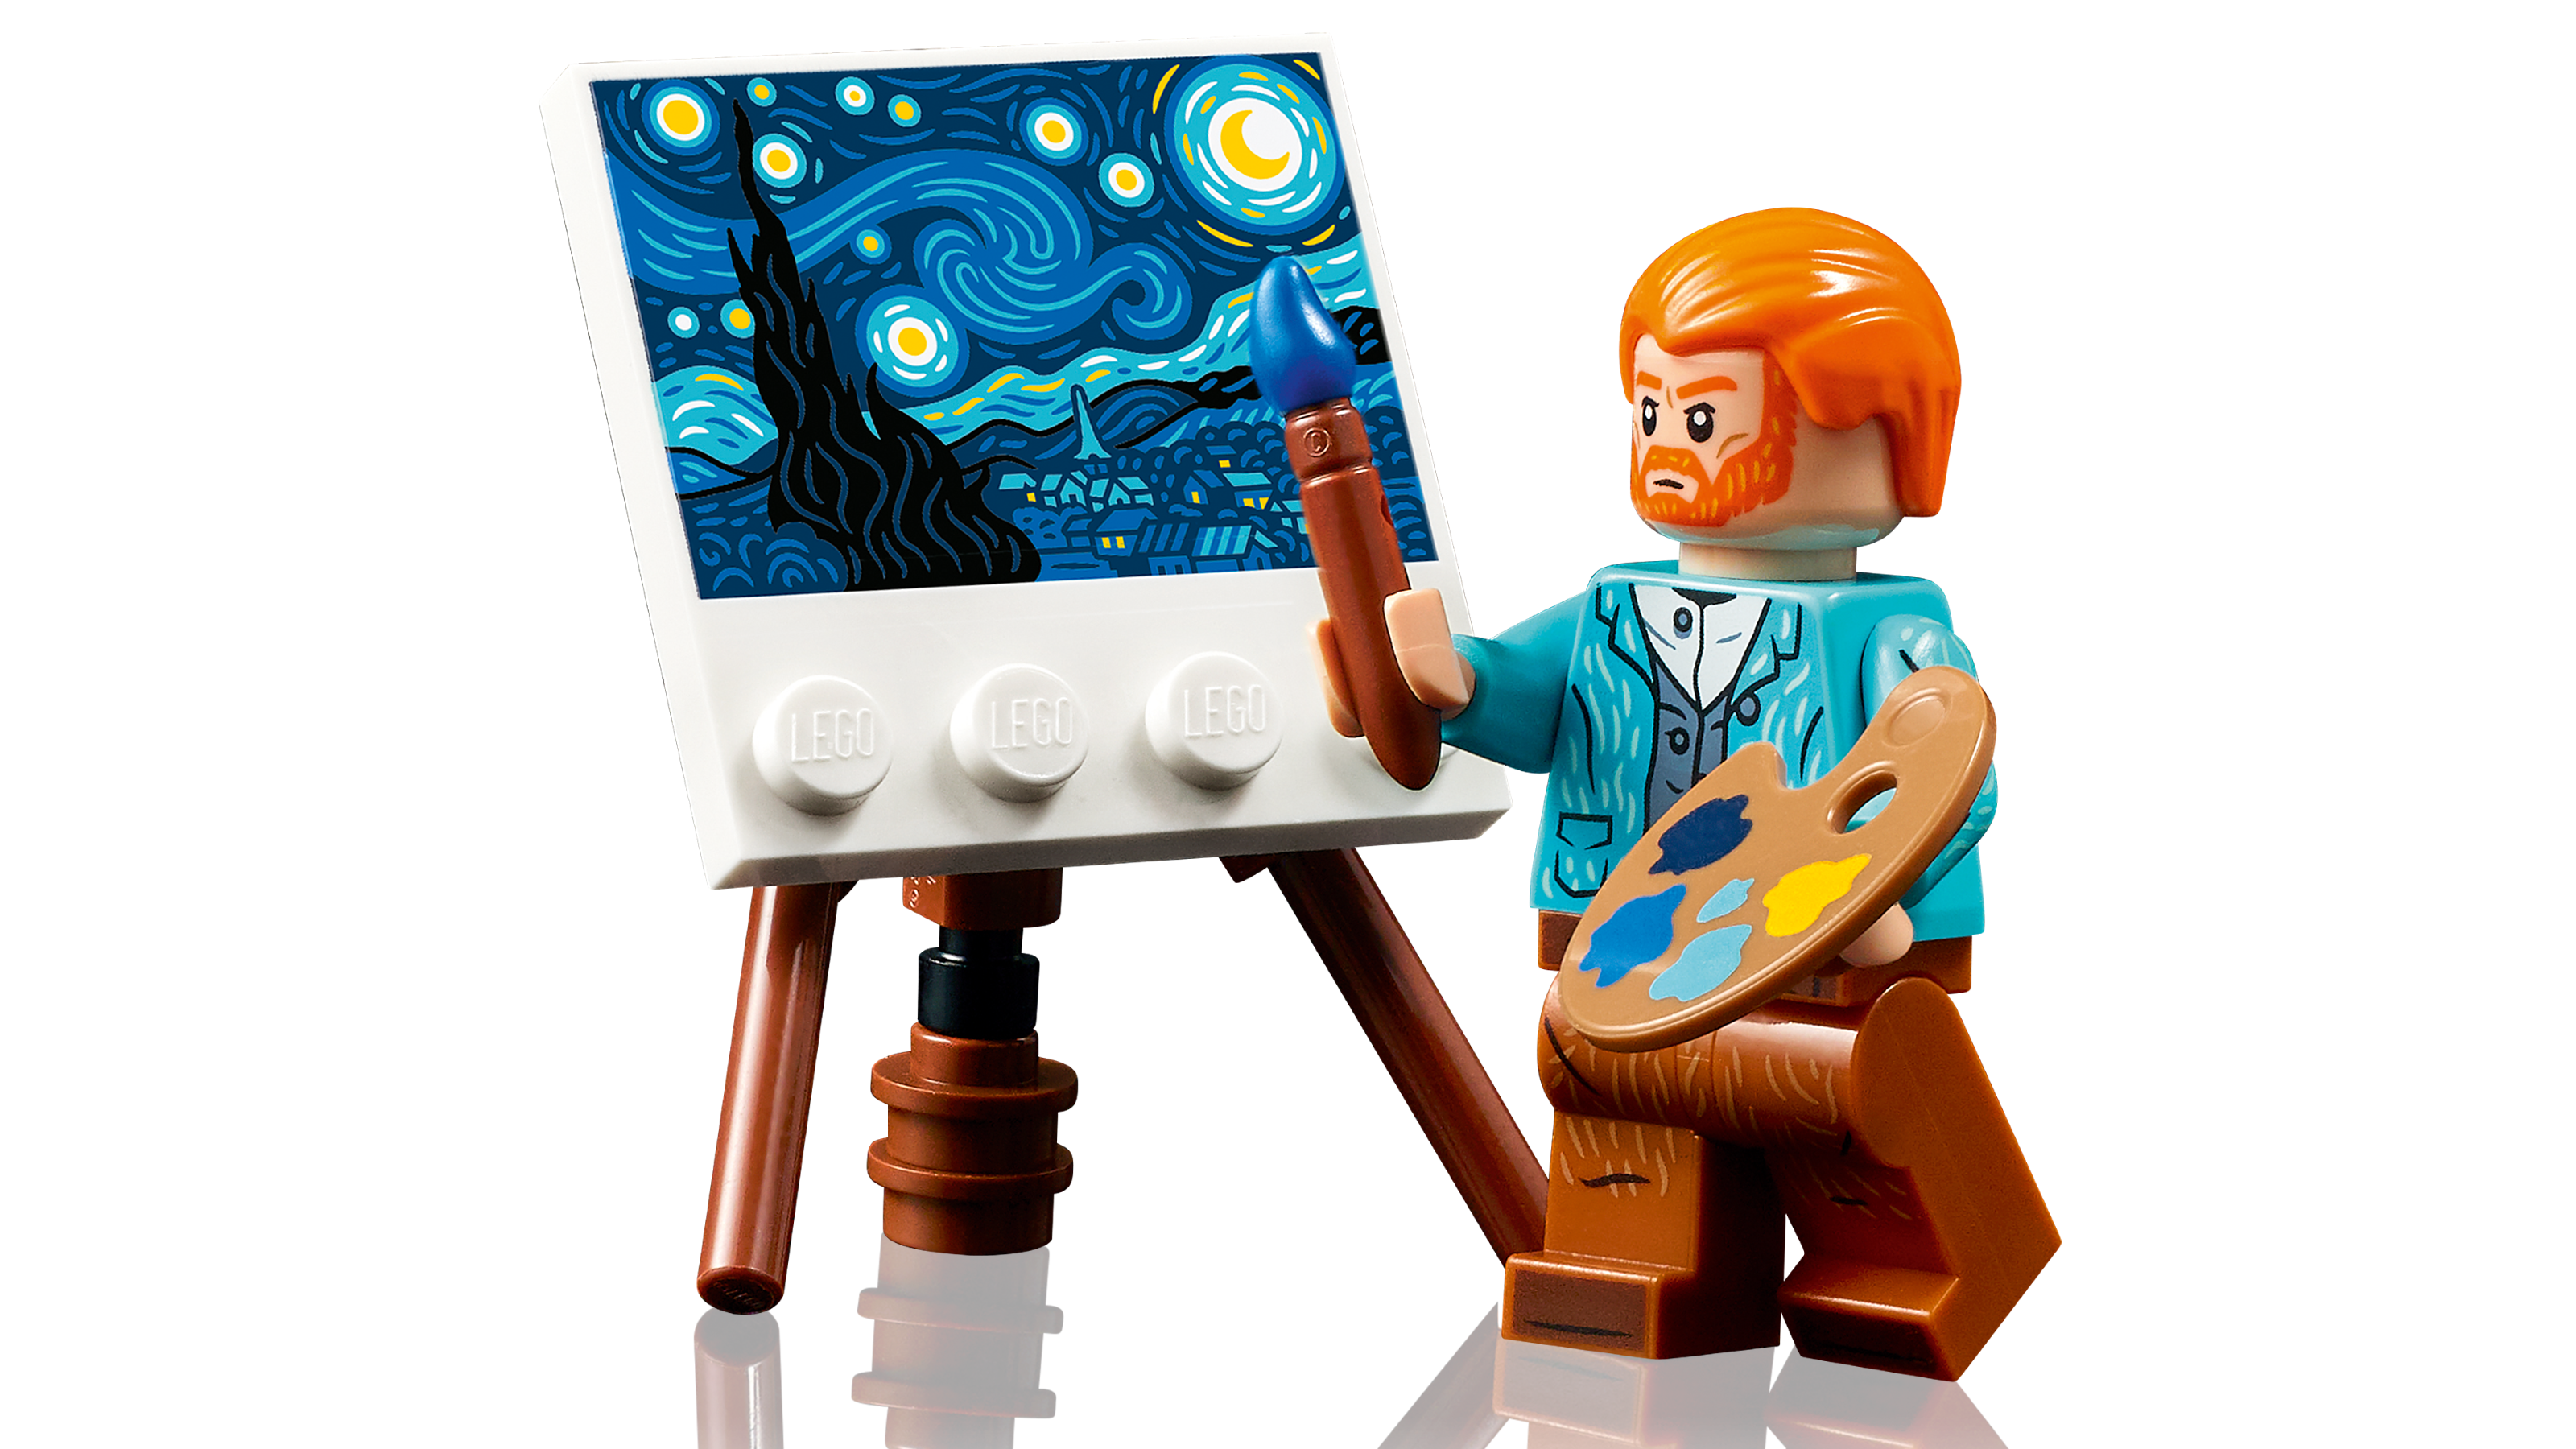 LEGO Van Gogh Archives - The Brothers Brick